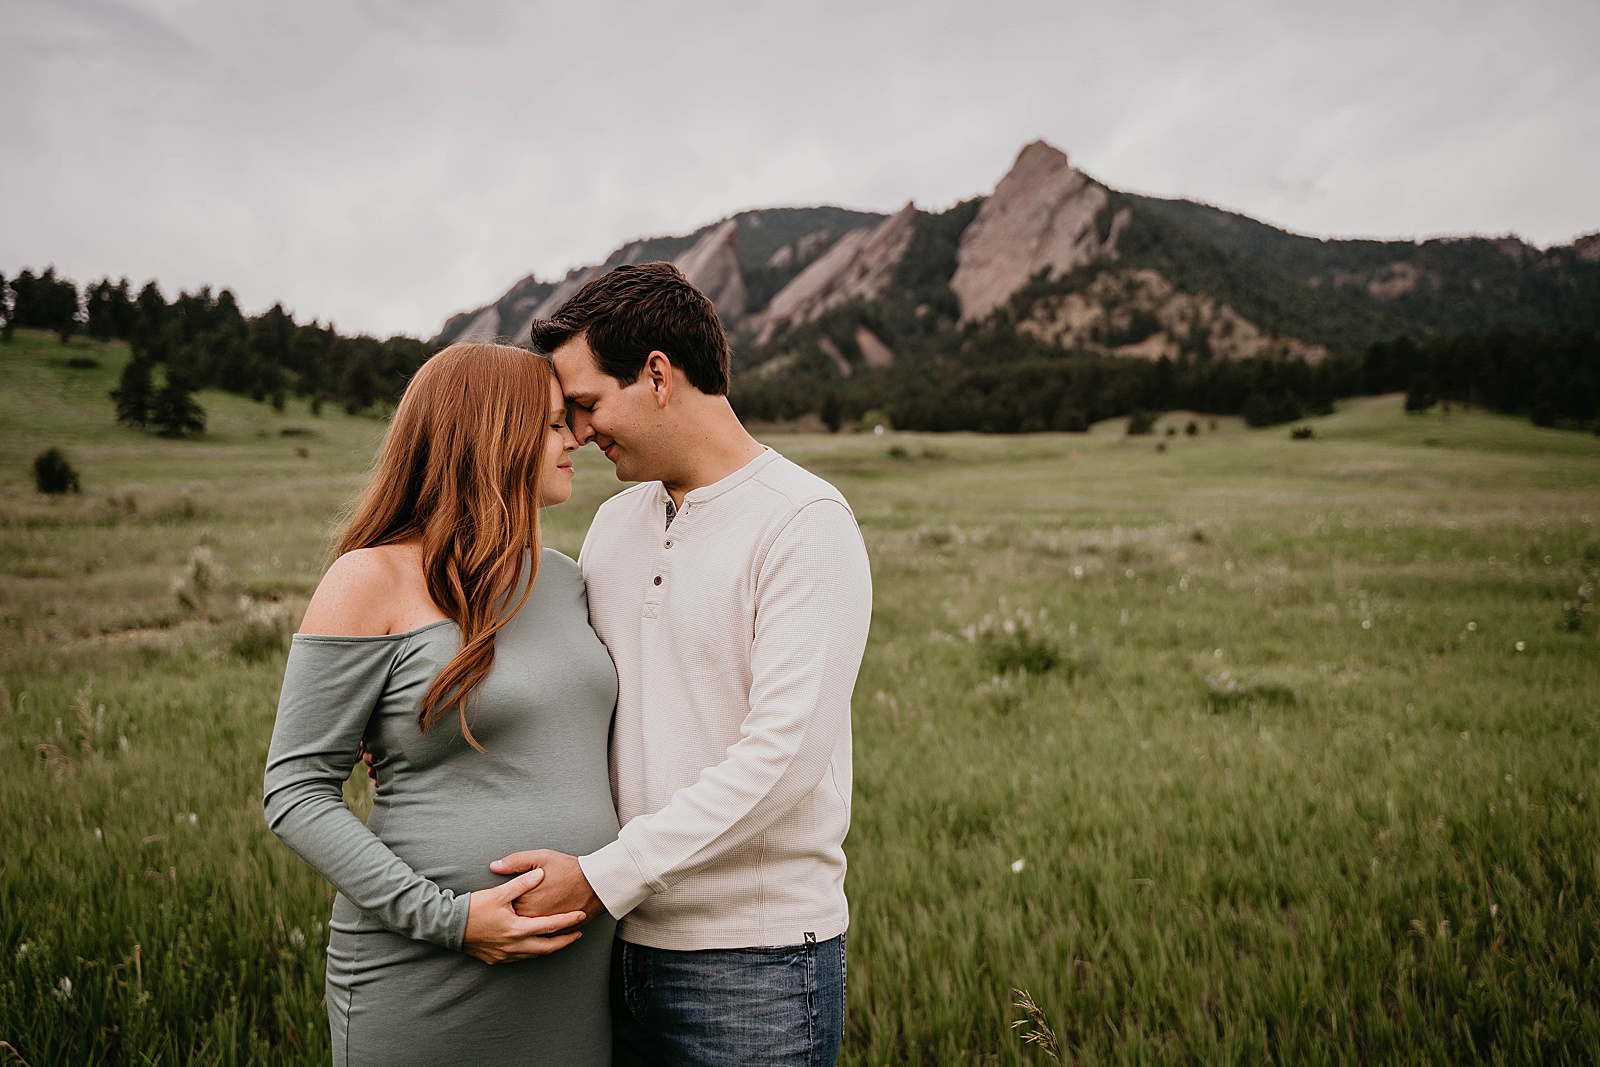 Colorado Mountain Maternity Session at Chitaqua Park captured by Destination Lifestyle Photographer, Krystal Capone Photography